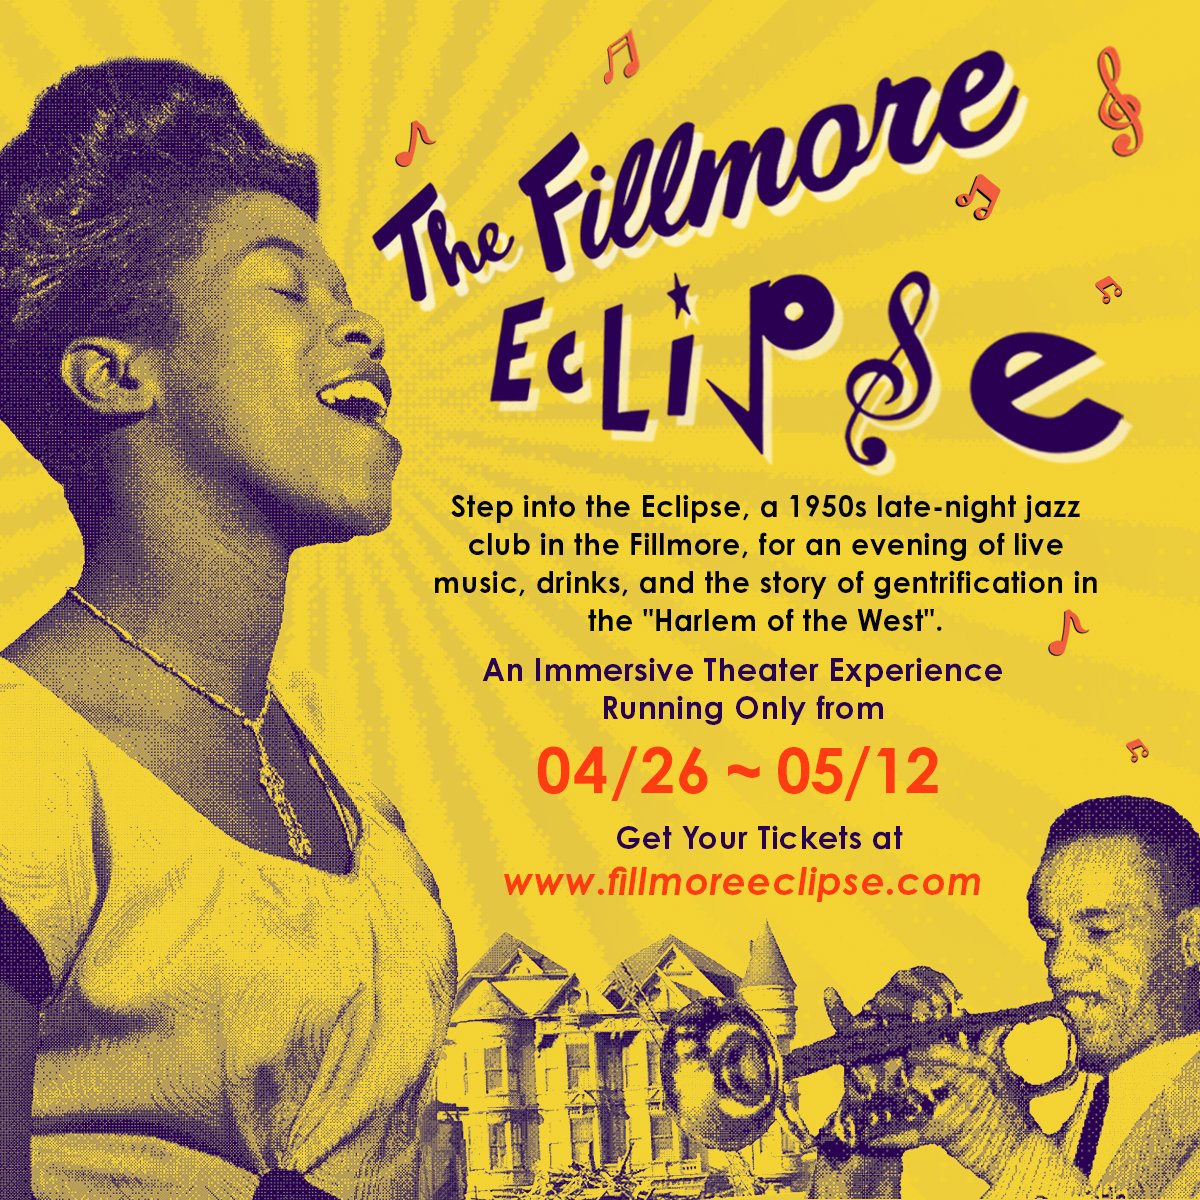 The Fillmore Eclipse, an immersive 1950s jazz club experience, is in full swing 🎶 Enter to win tickets, and rediscover The Fillmore's deep history through interactive characters, artifacts, and live music ✨👉t.dostuffmedia.com/t/c/s/143186